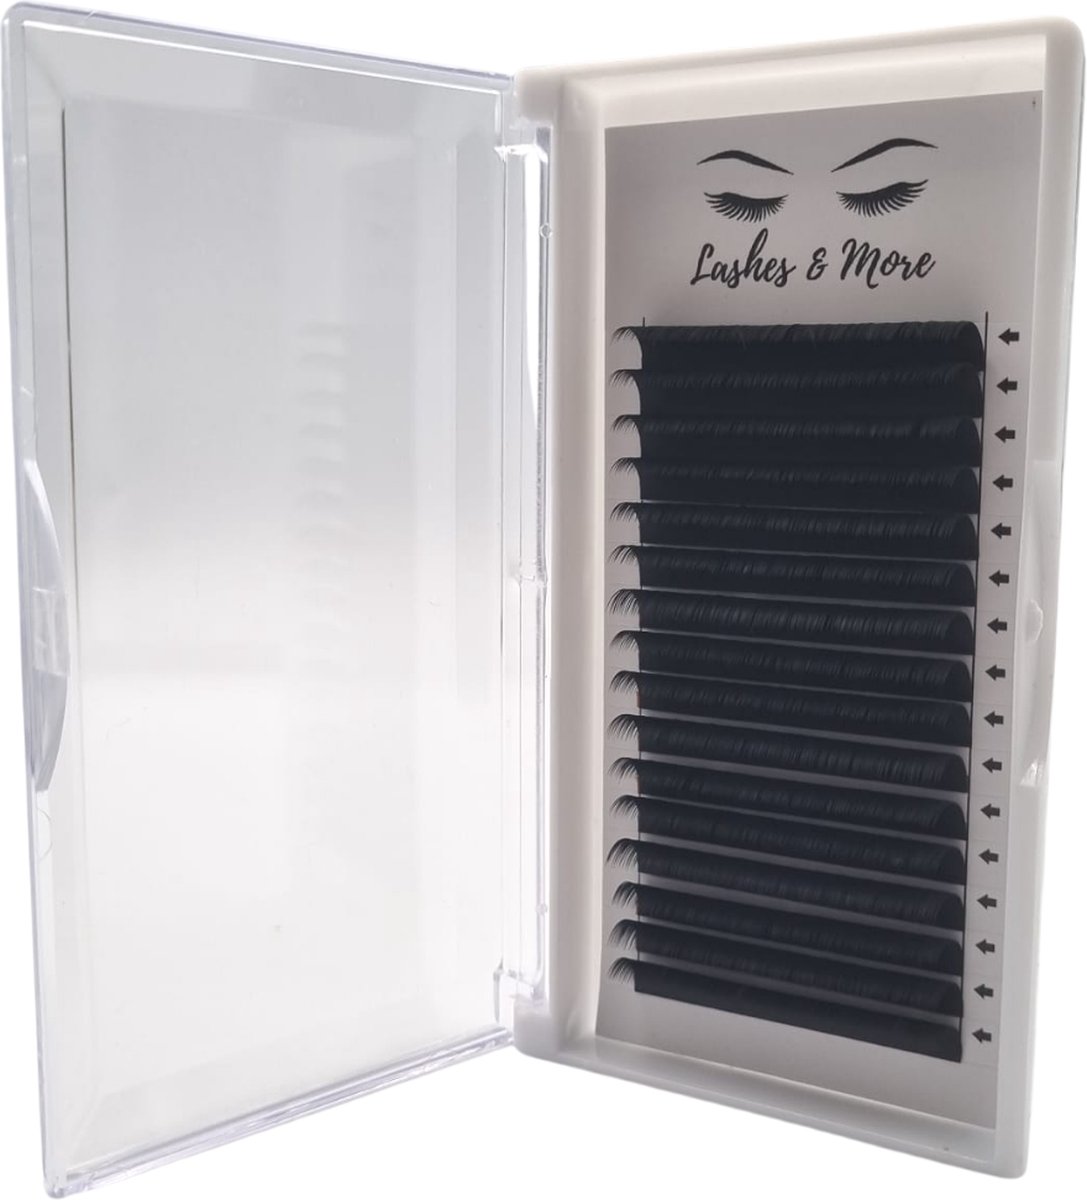 Lashes & More wimperextensions - One By One - D Krul – Dikte 0.20 – Lengte 10mm – 16 rijen in een tray - nepwimpers - Flat Lashes